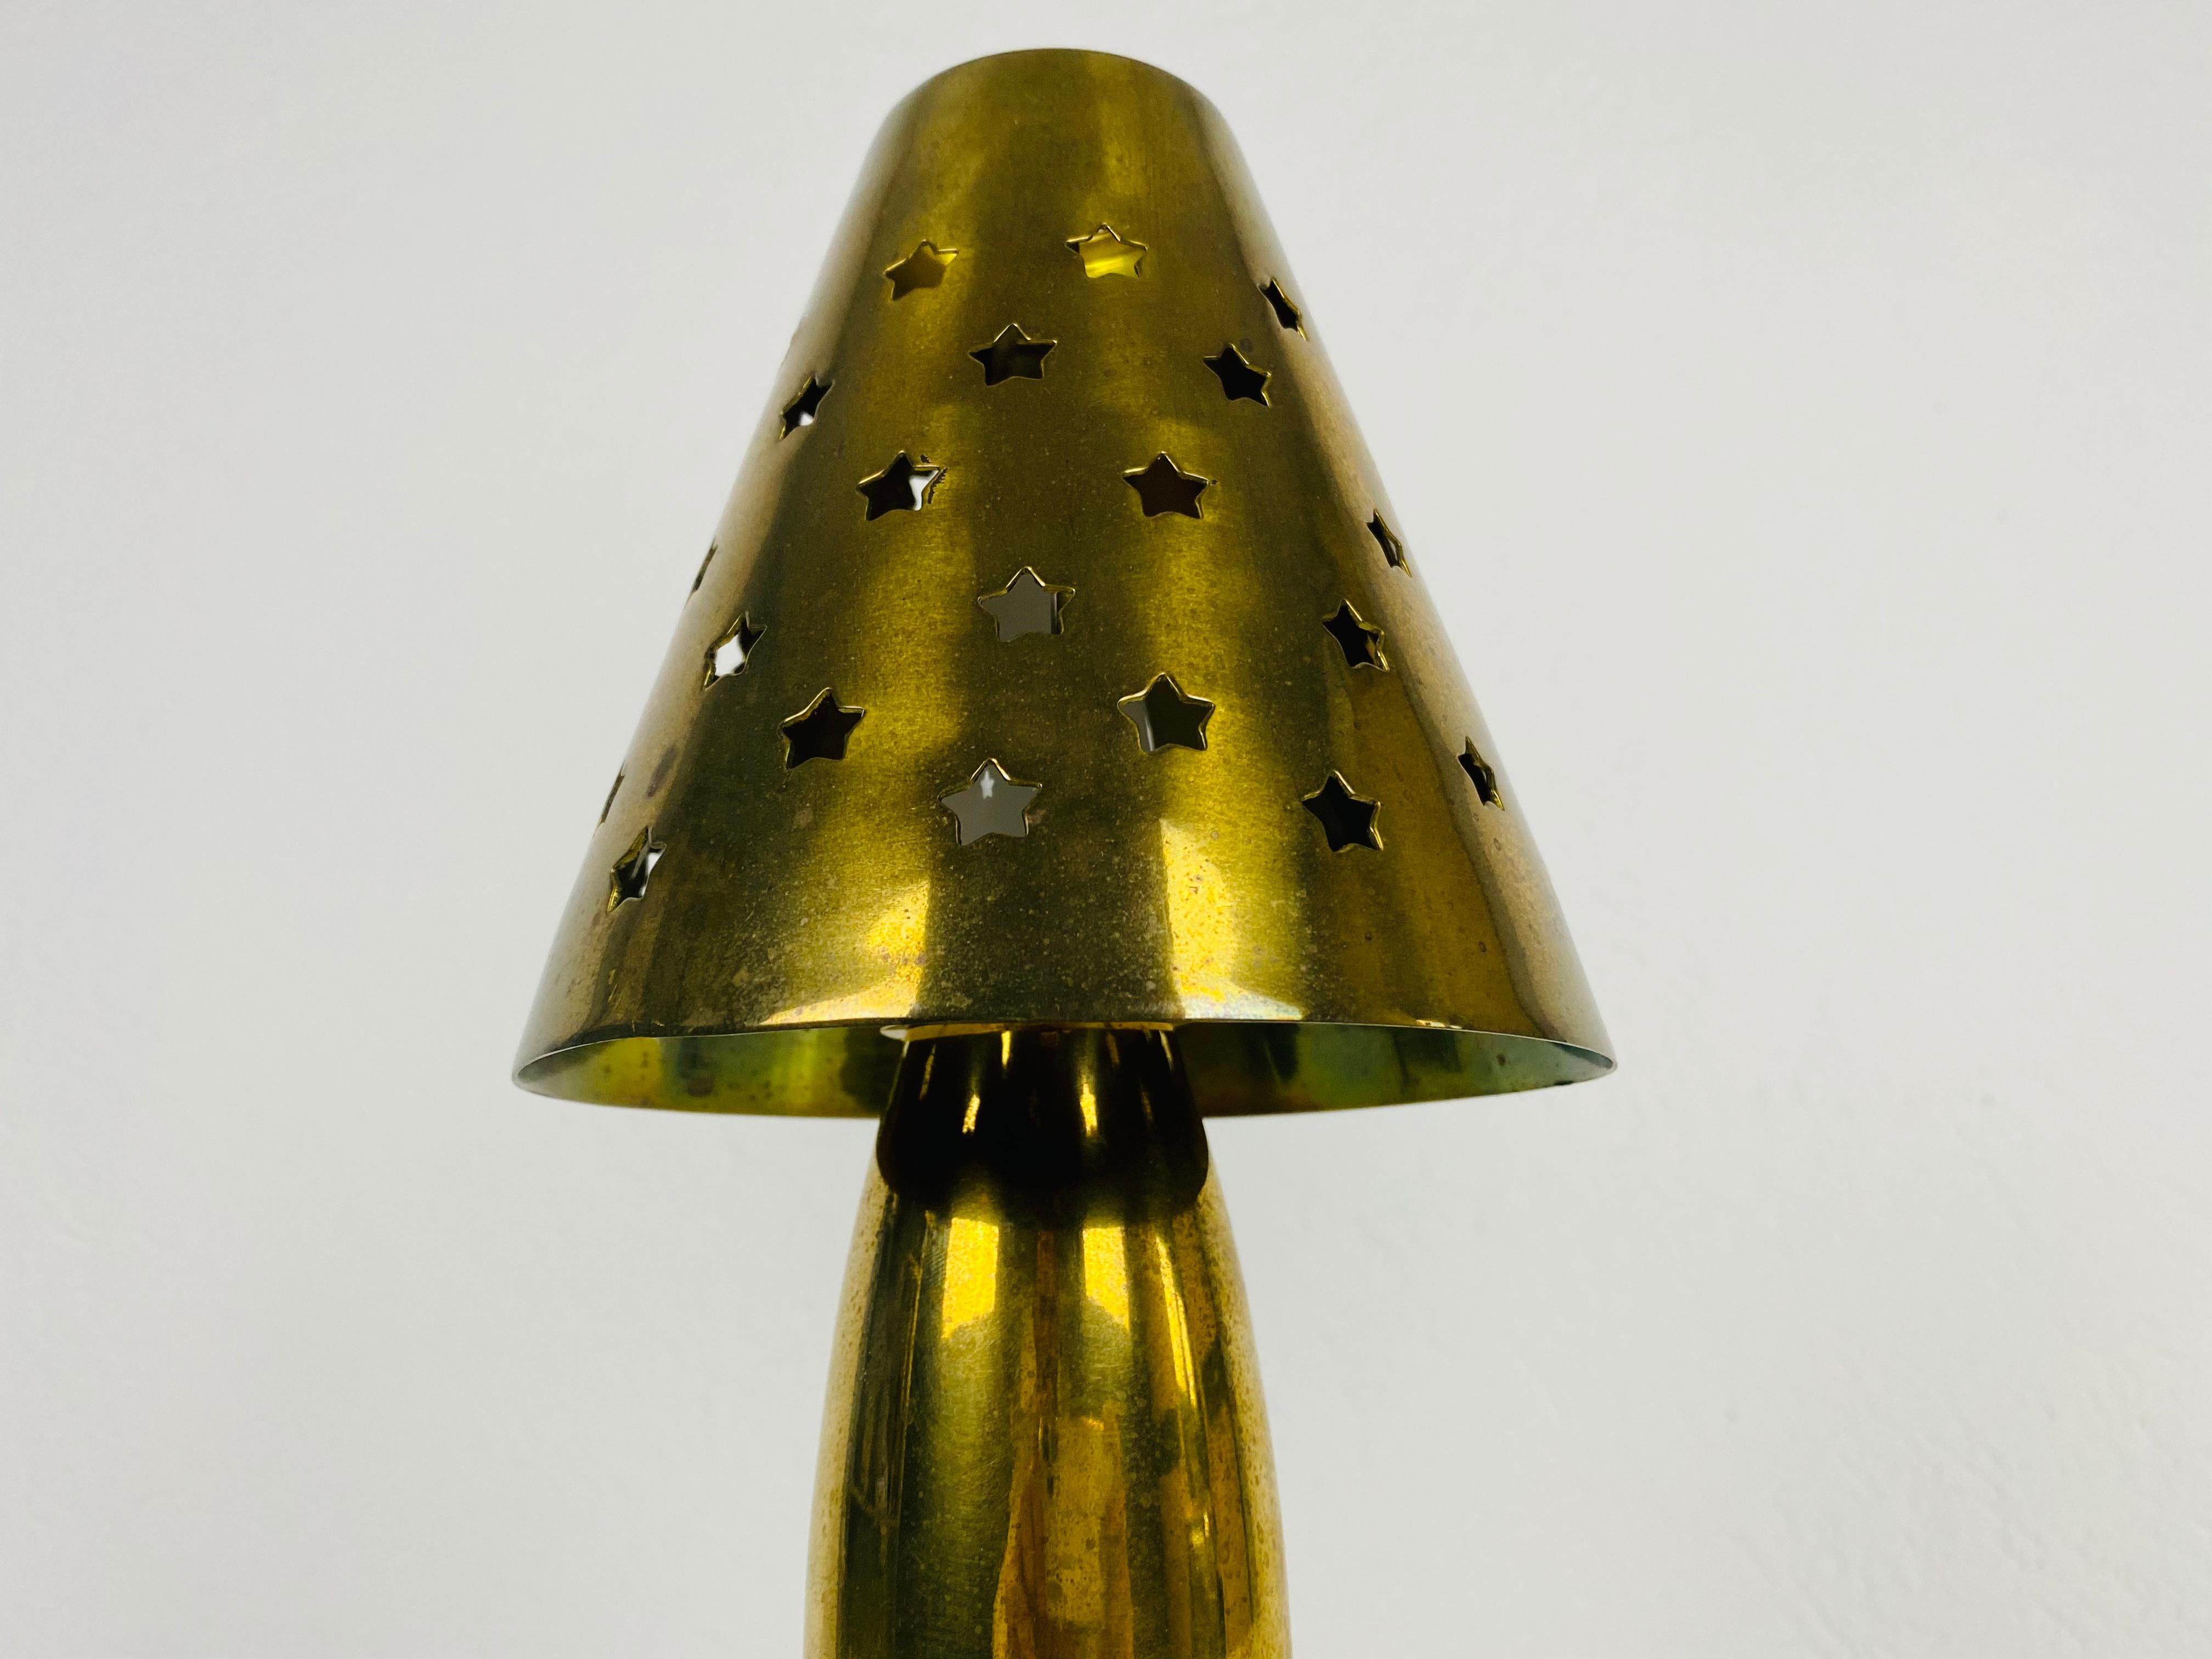 Midcentury Solid Brass Table Lamp by Studio Lambert, 1980s For Sale 6